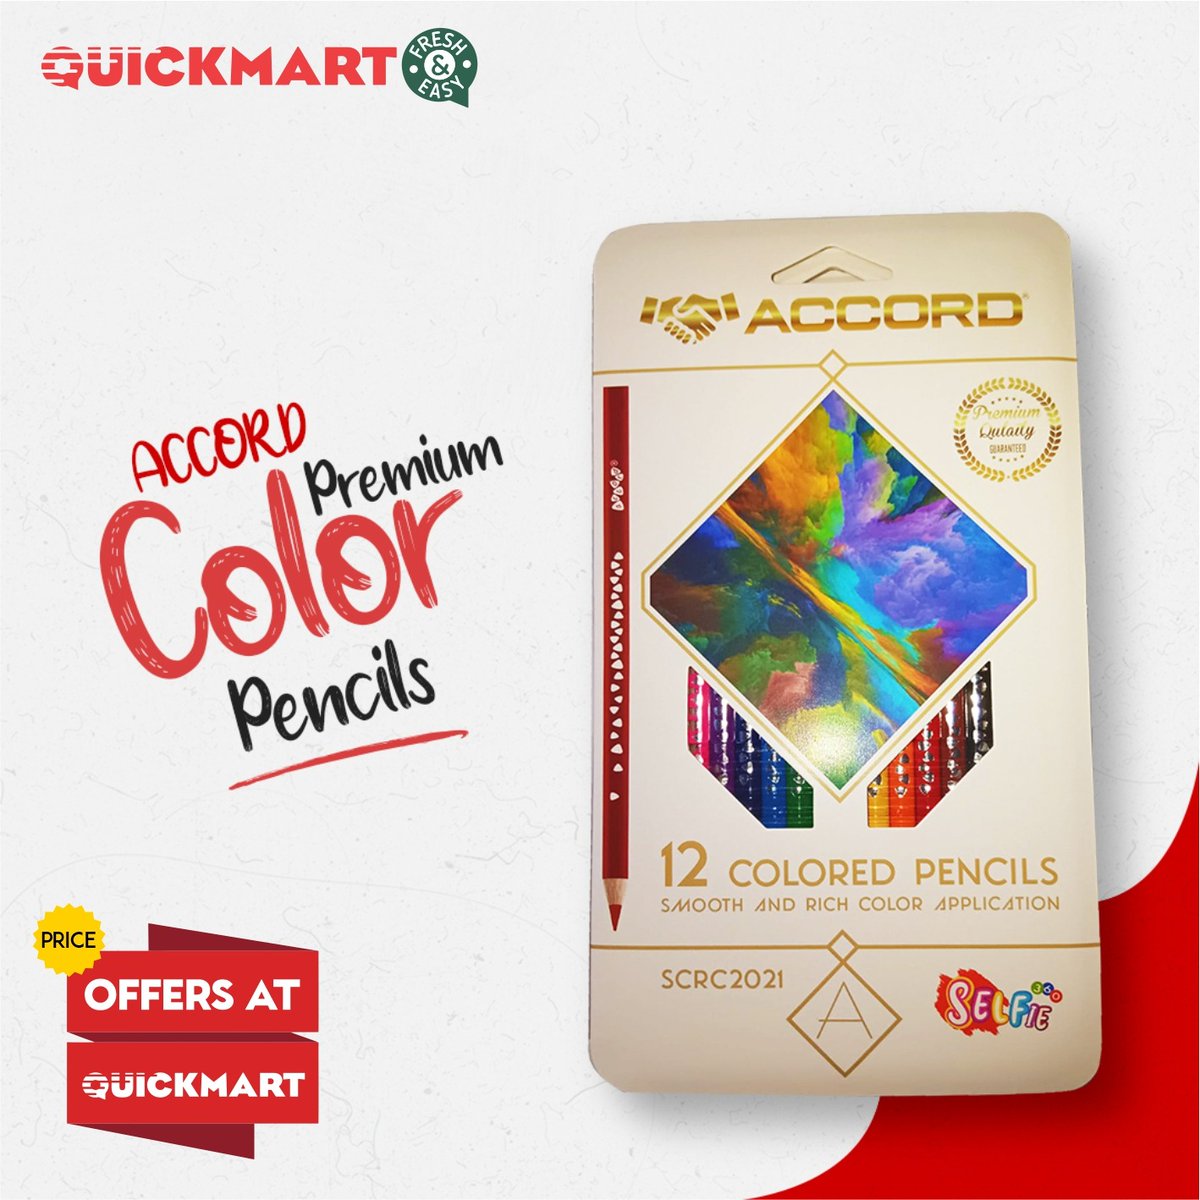 Unleash your inner artist with the vibrant #AccordPremiumColourPencil! 🤩 Now on offer at @QuickmartKenya!

These high-quality pencils are perfect for any drawing project & built to last. ✏️ Ideal for home, school or the office! #Beinafuu #backtoschool  @store_centropen